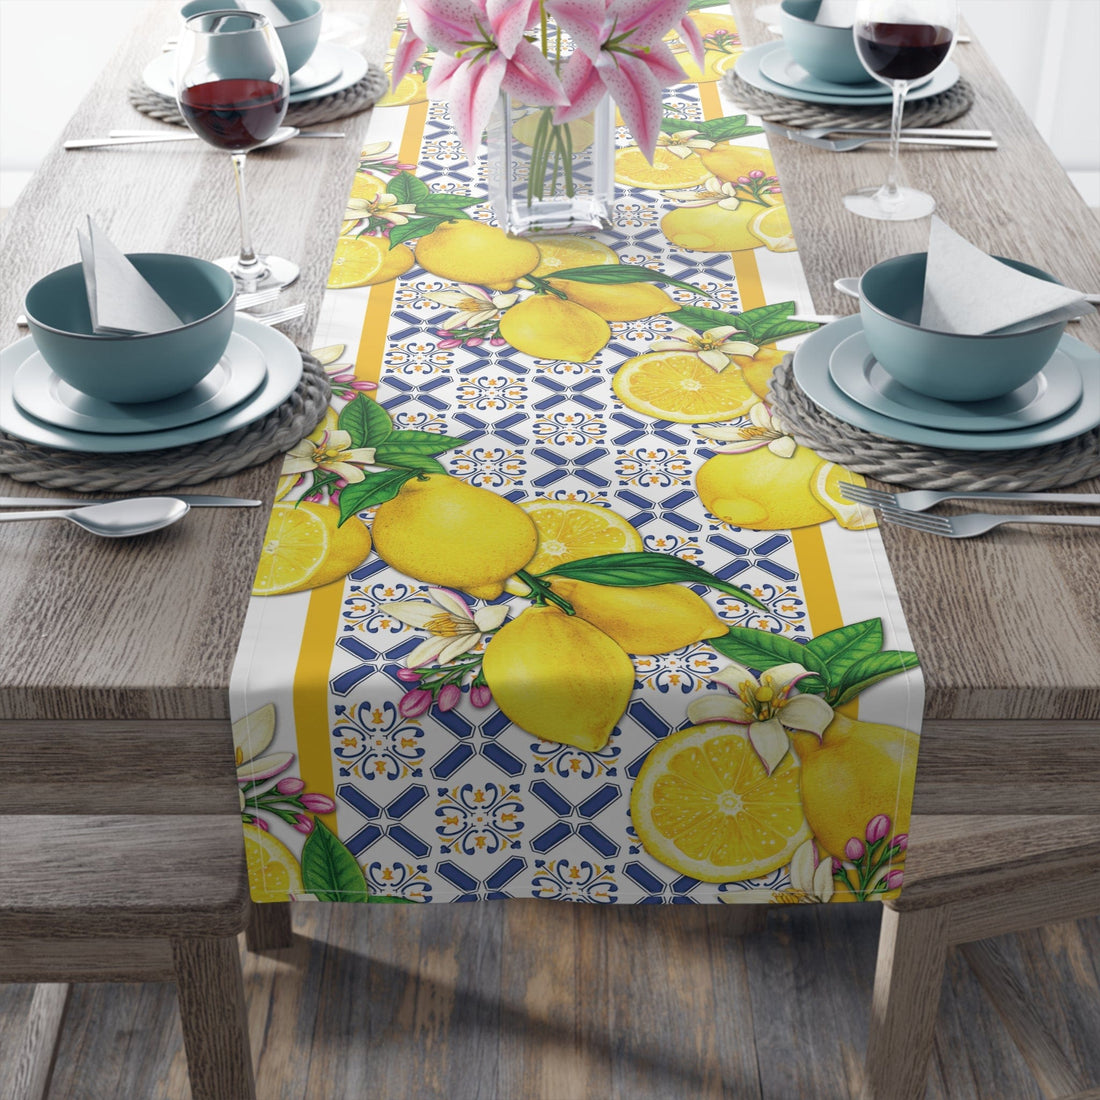 Kate McEnroe New York Cobalt Blue and Yellow Lemon and Tiles Table Runner, Mediterranean Floral Dining Table Centerpiece, Fall Home Decor, Holiday Table SettingTable Runners32773695513184694539